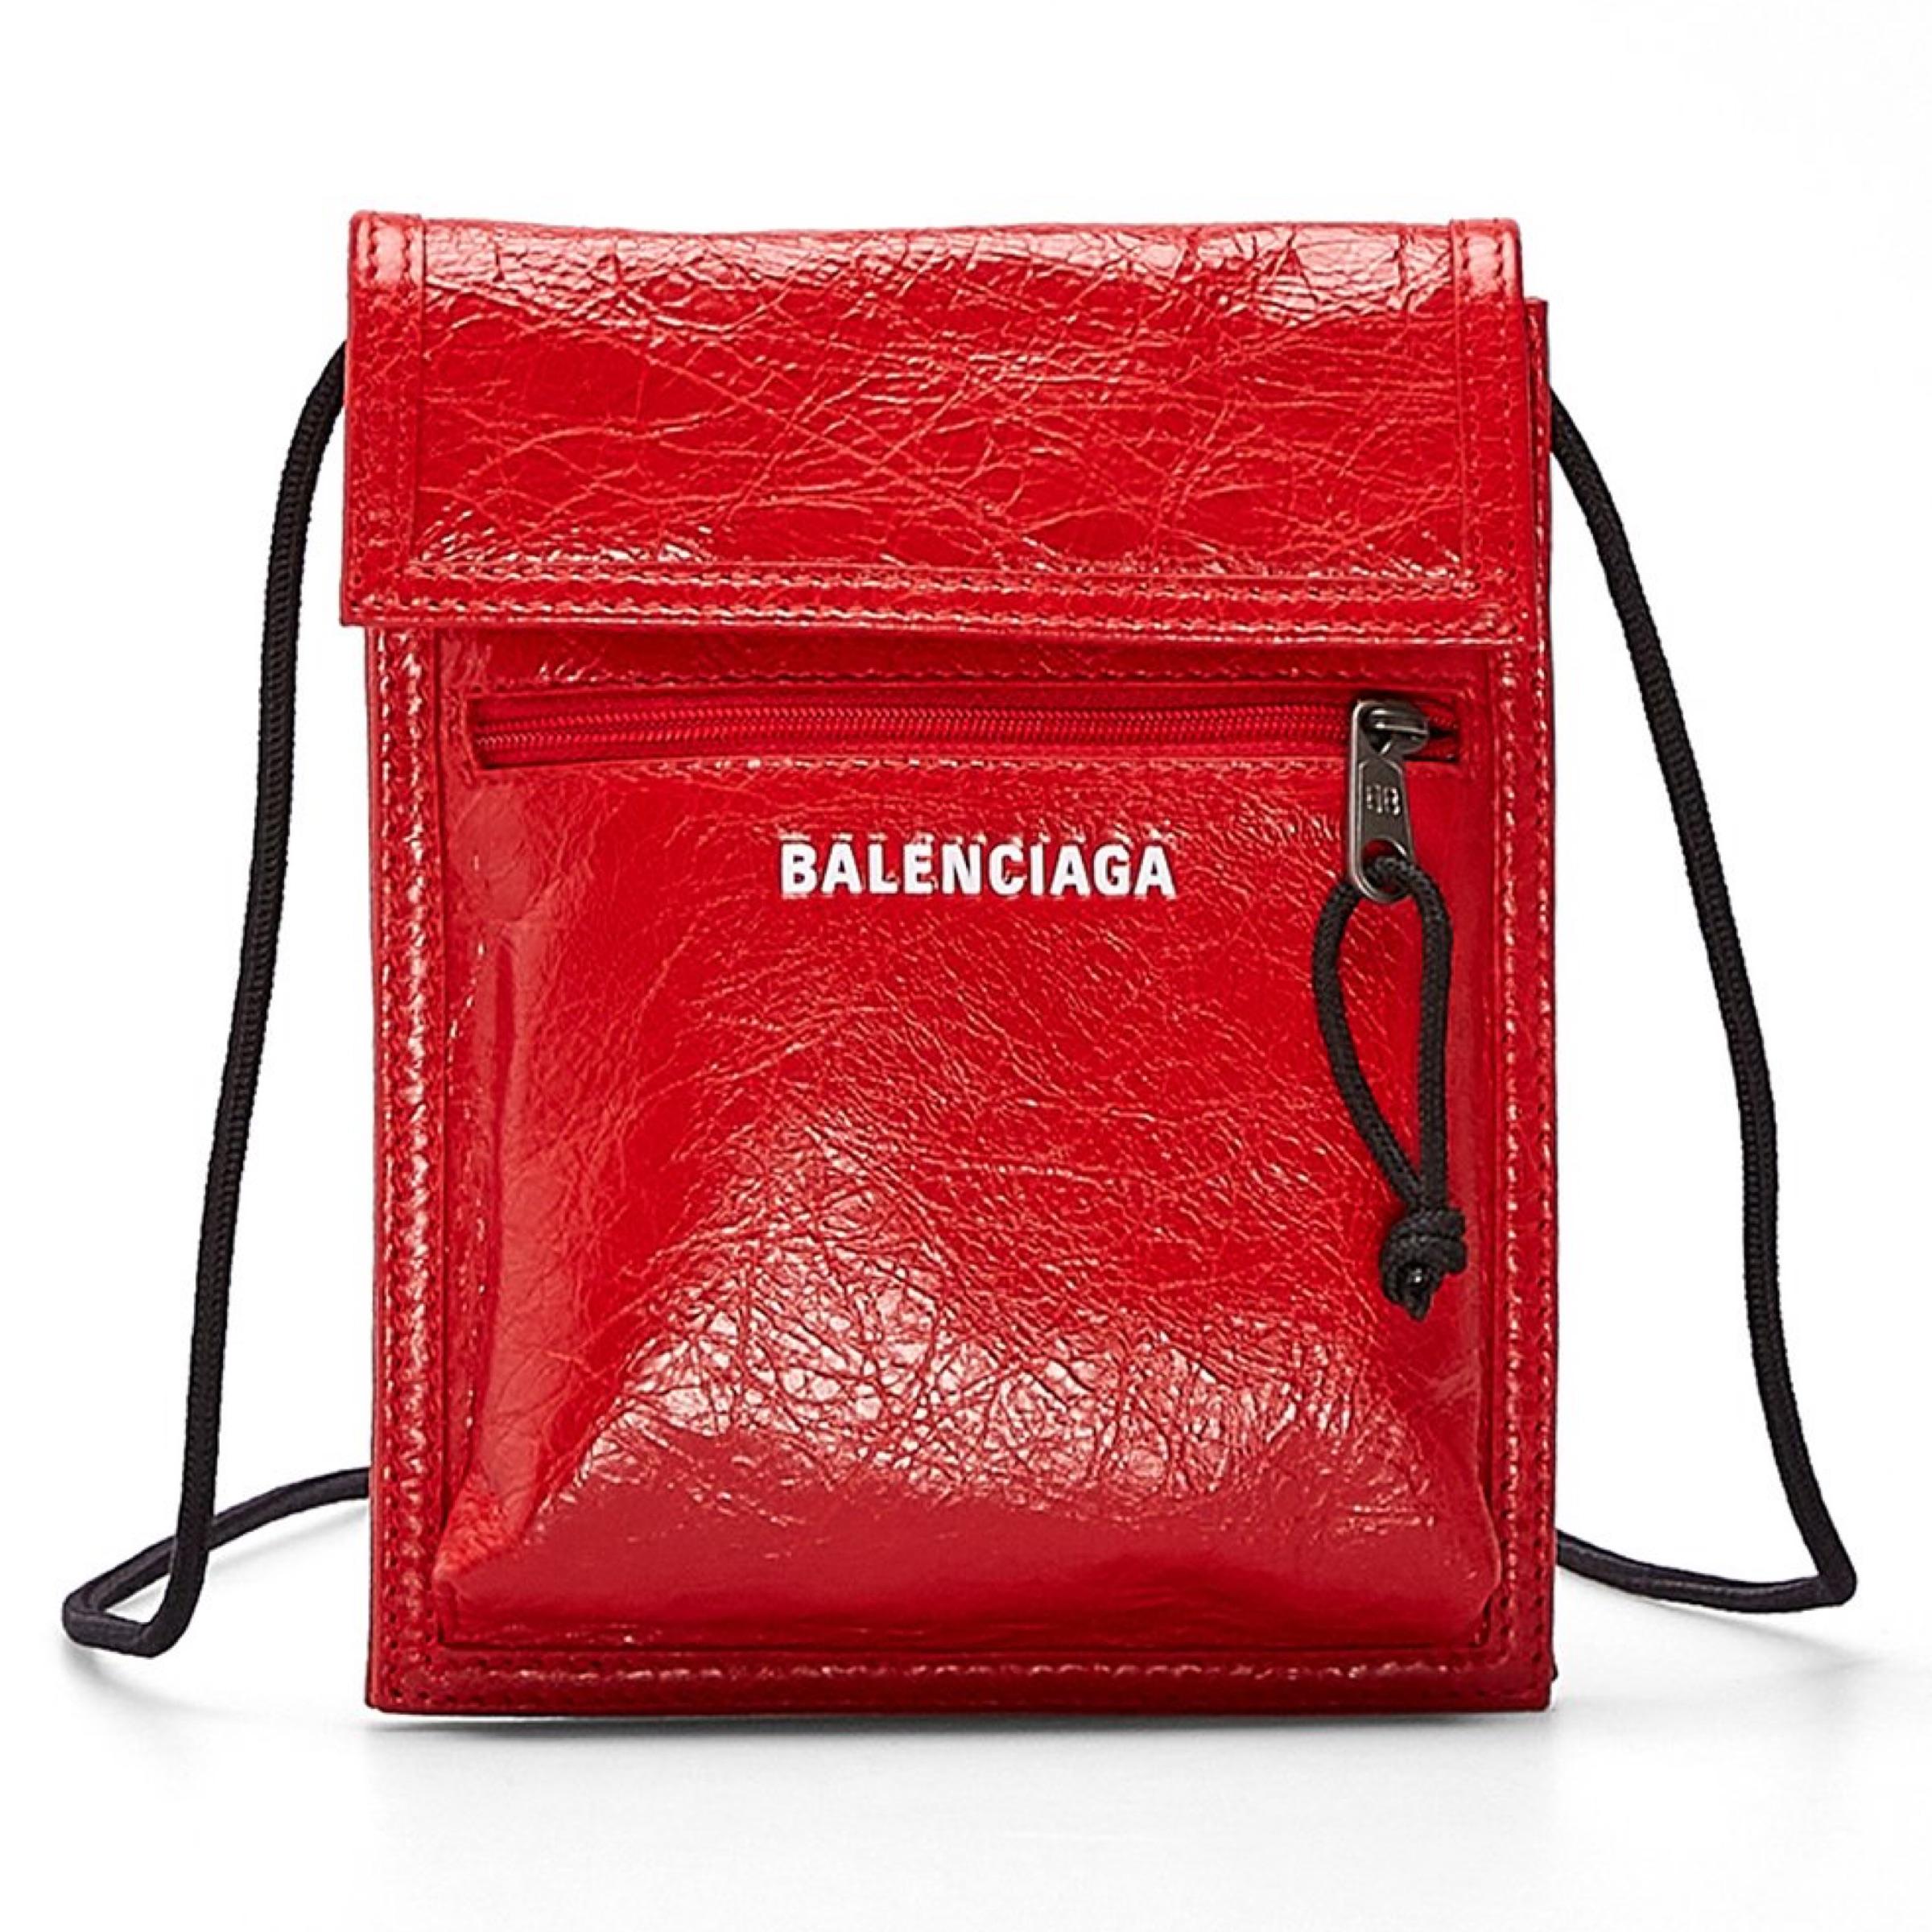 Women's or Men's NEW Balenciaga Red Explorer Cracked Leather Pouch Crossbody Bag For Sale